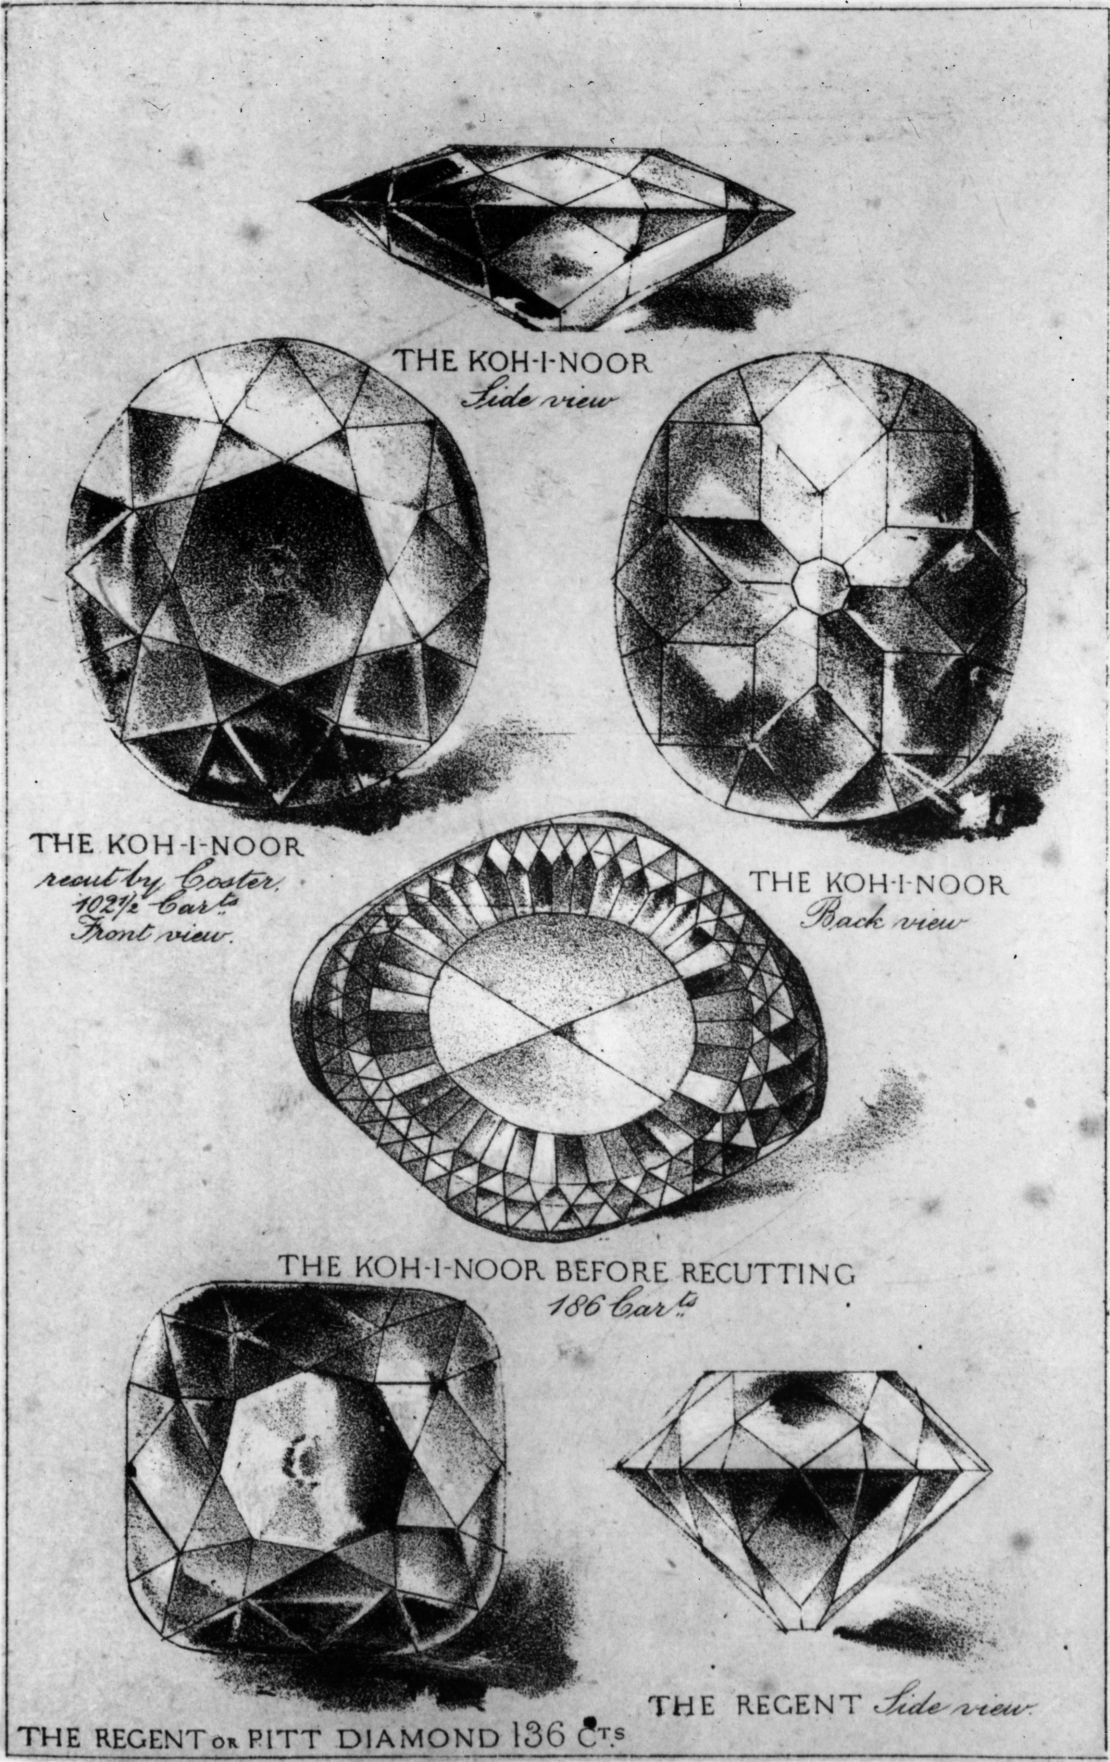 Sketches of the Kohinoor from circa 1860.